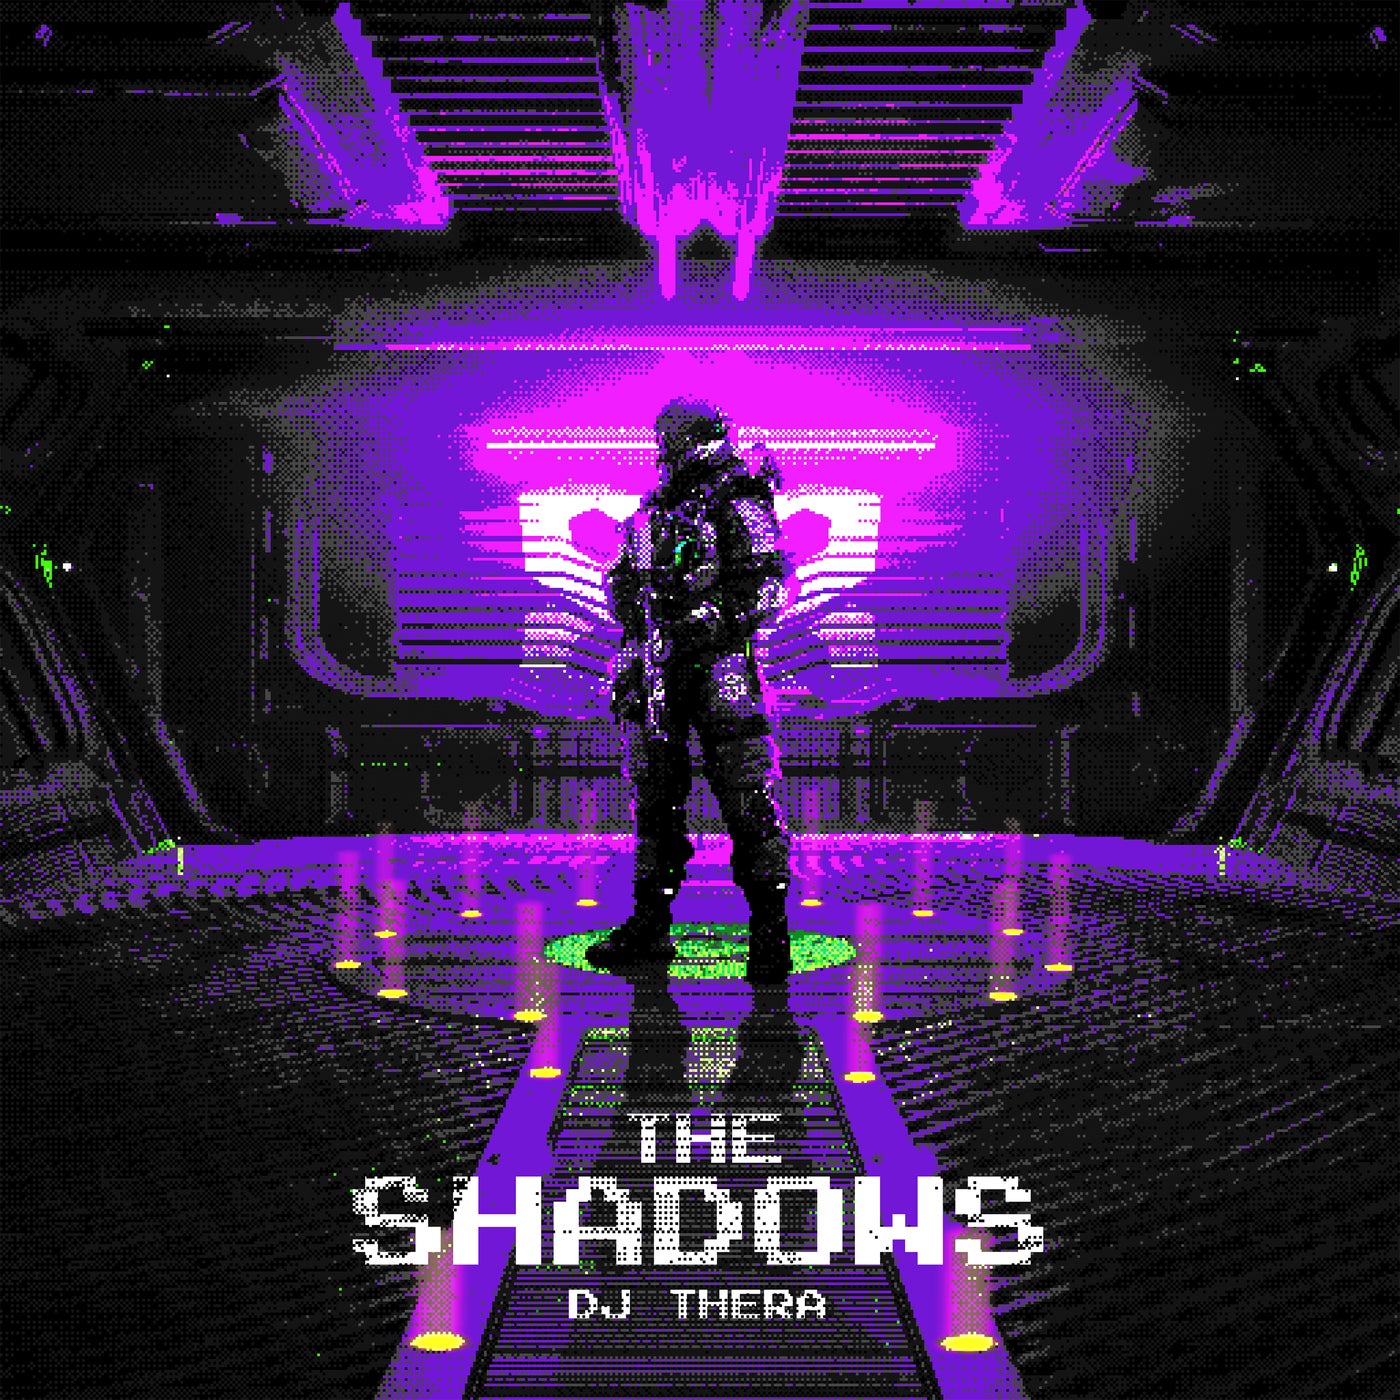 The Shadows - Pro Mix